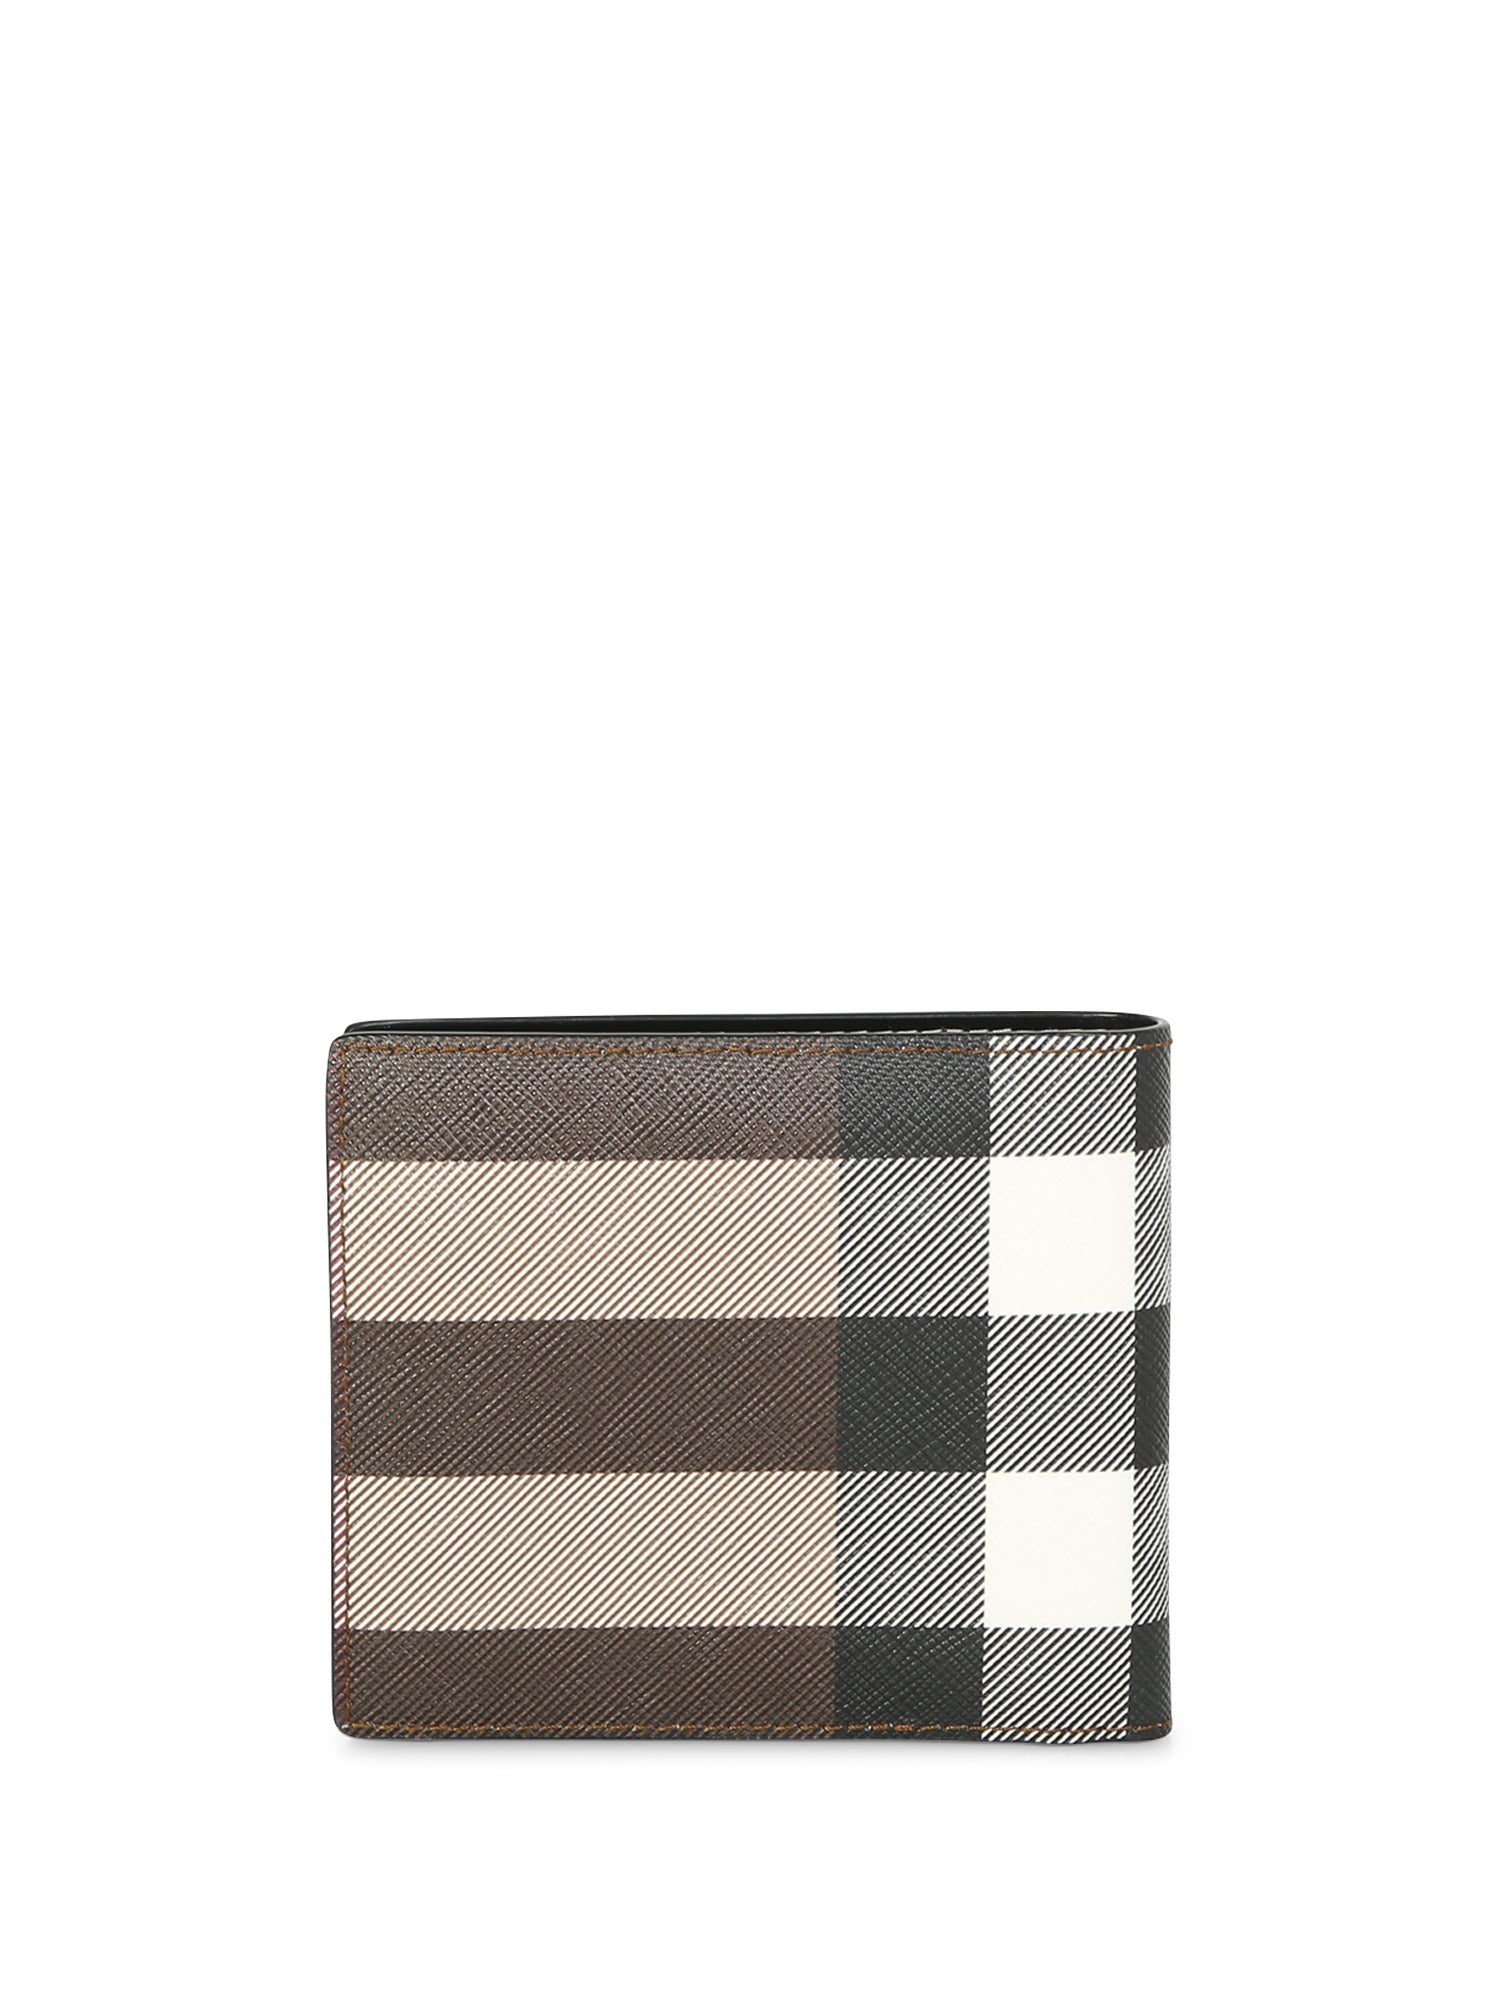 Wallet with check pattern by Burberry is a classic and timeless access –  DELL'OGLIO